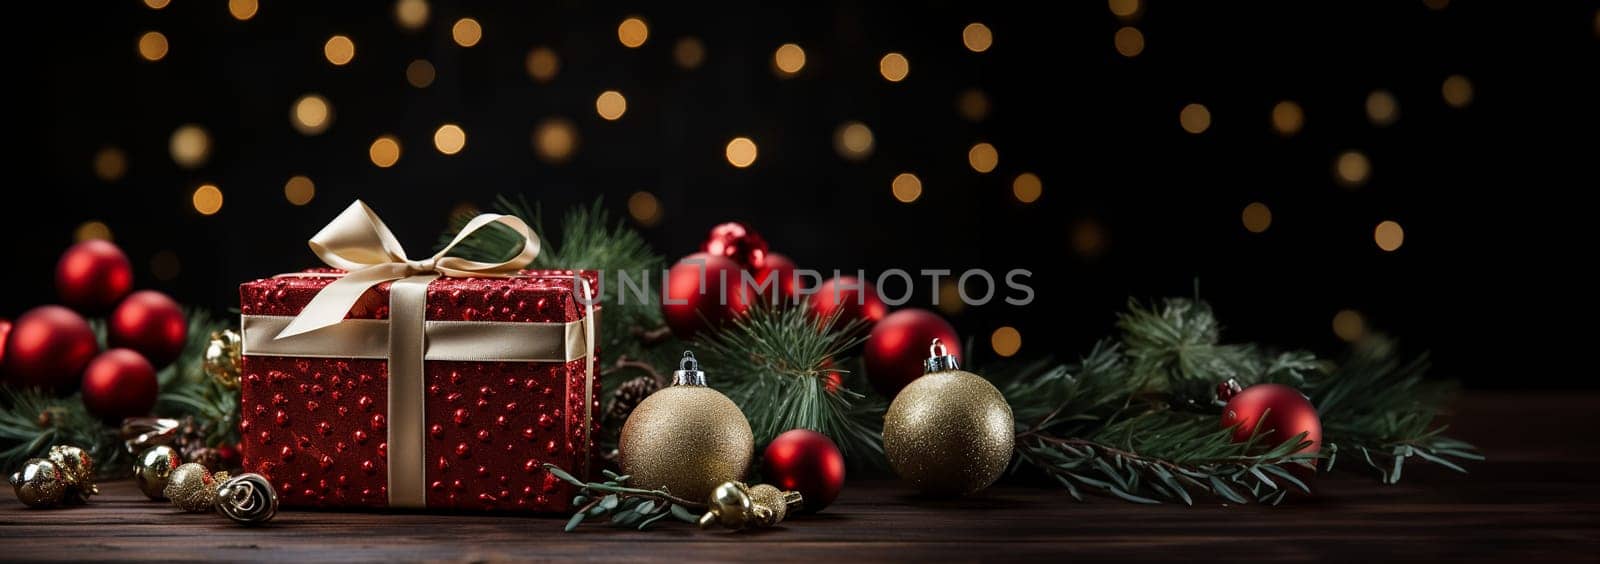 Christmas background theme. Christmas composition. Gifts, fir tree branches, red decorations on dark background. Christmas, winter, new year concept. Flat lay, top view, copy space. Merry Christmas Holiday by Annebel146